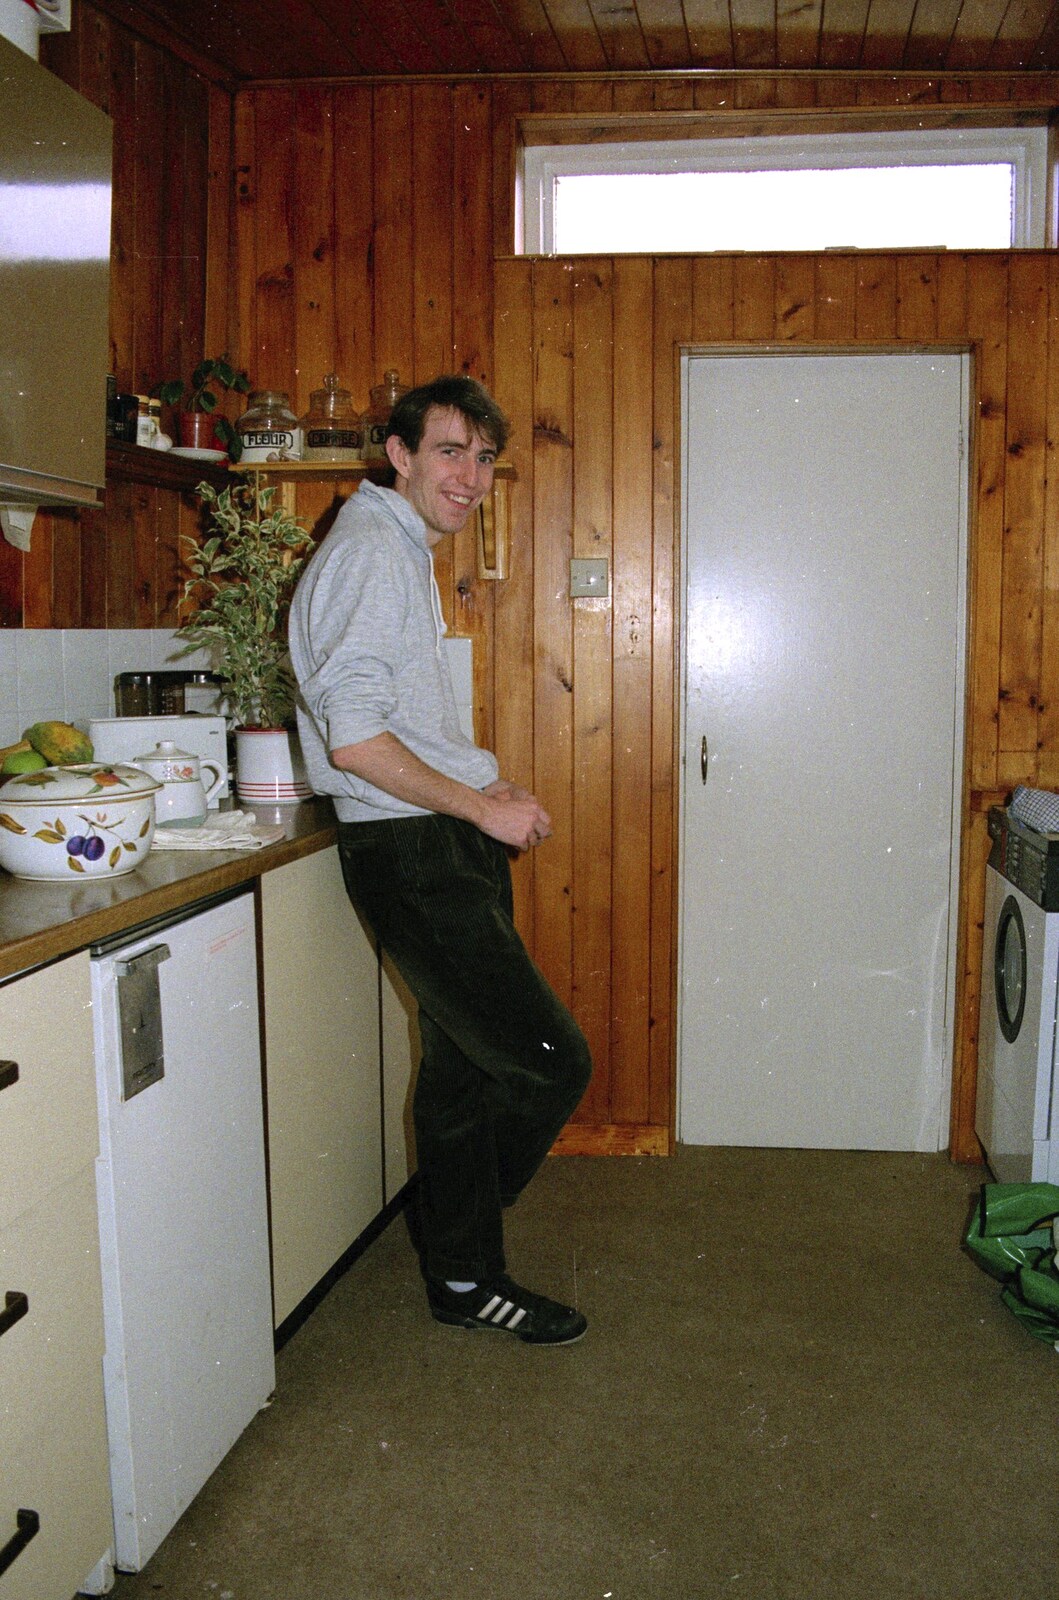 A Trip to Plymouth and Bristol, Avon and Devon - 18th February 1990: Dave in hist student-ey kitchen